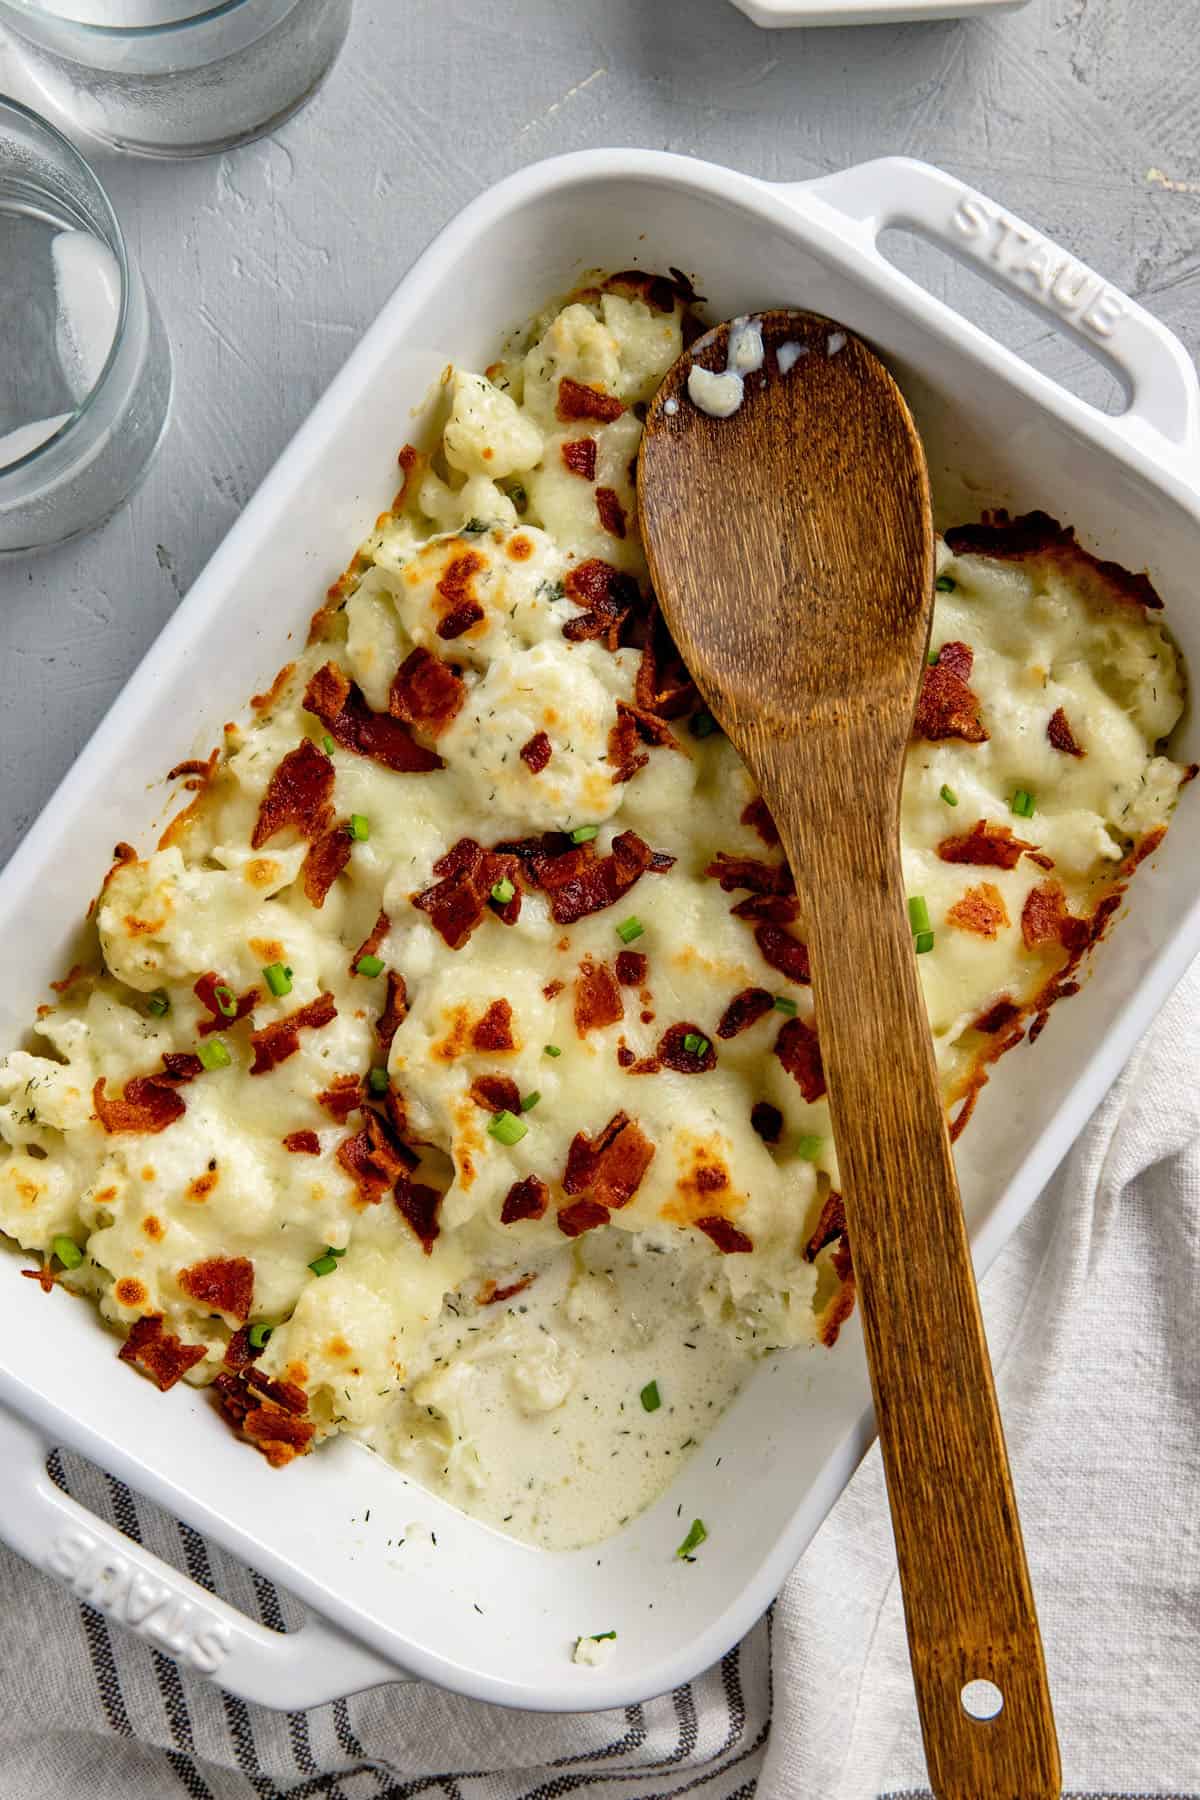 baked casserole in a white dish with wooden spoon on top